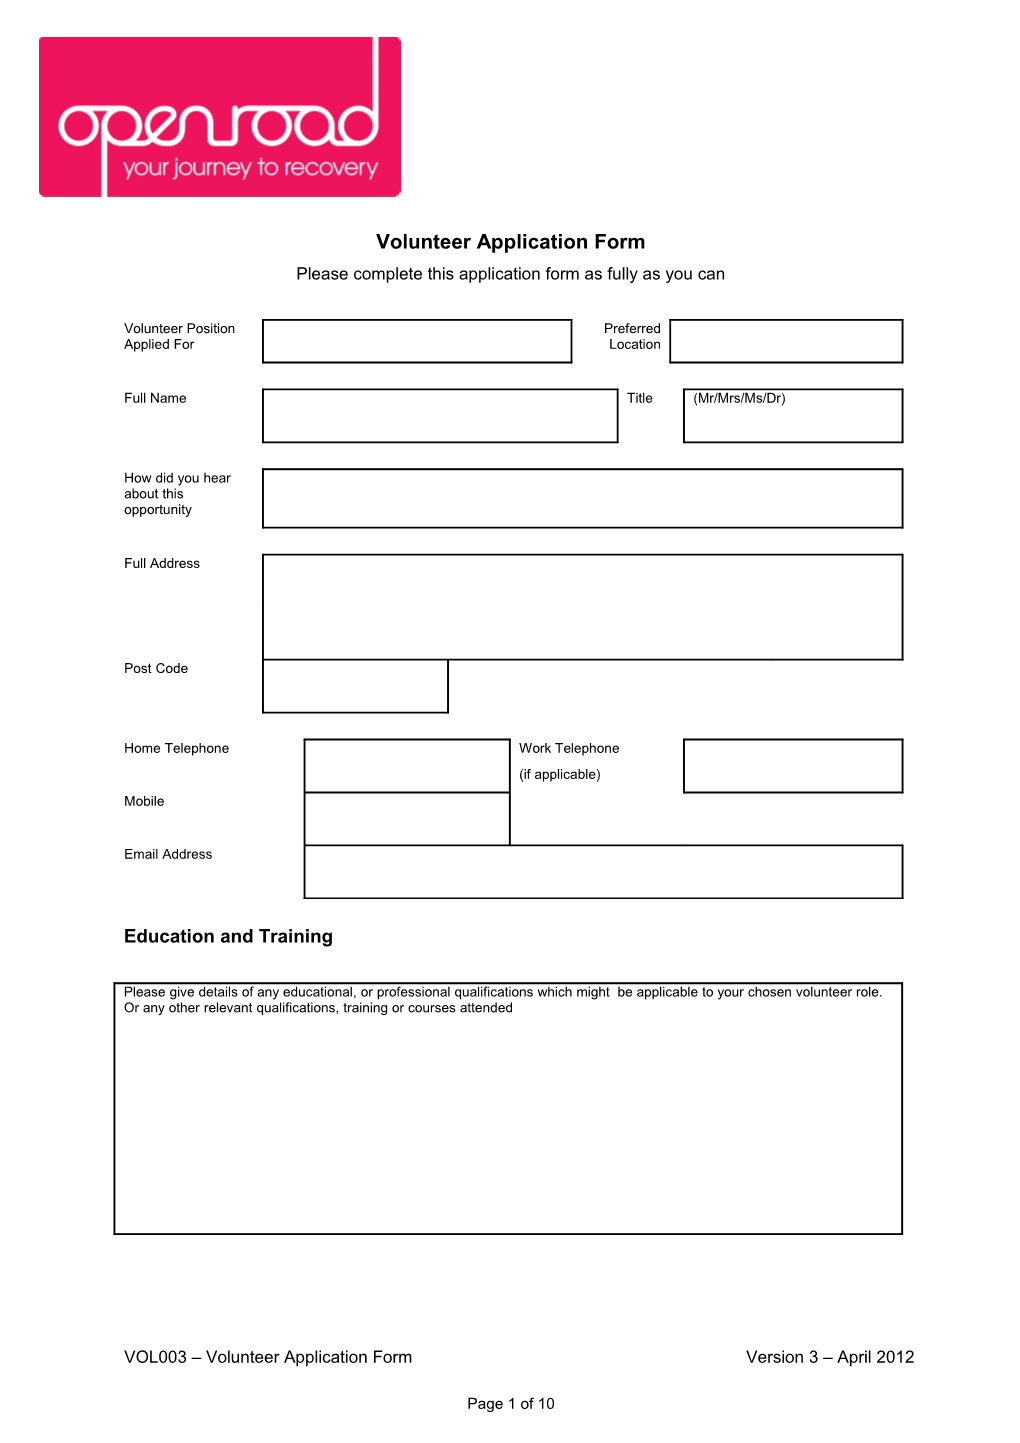 Please Complete This Application Form As Fully As You Can